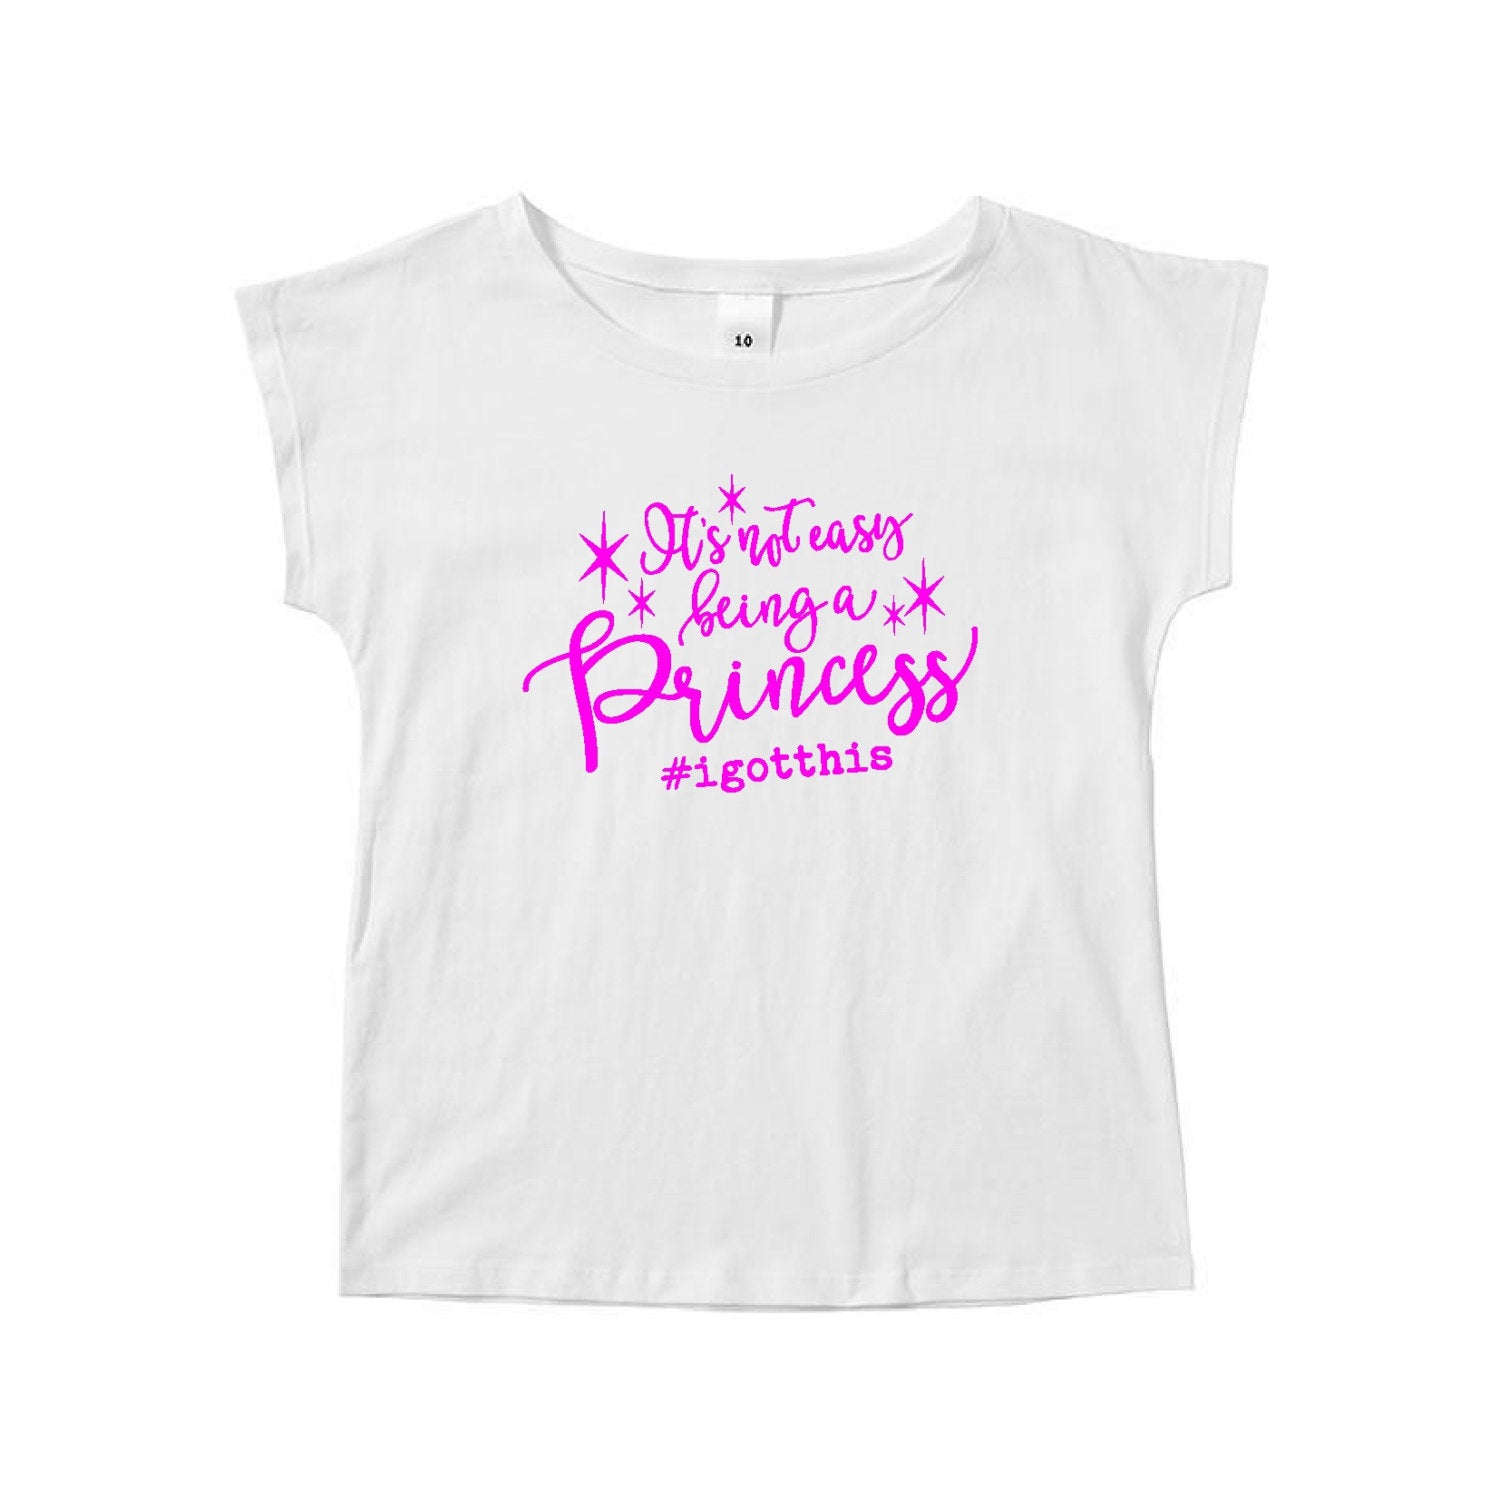 It's Not Easy Being A Princess #igotthis Girls T-Shirt, White Short Sleeve Cotton TShirt For Girls, Funny Gift, Princess Tee, G-W-SS-T